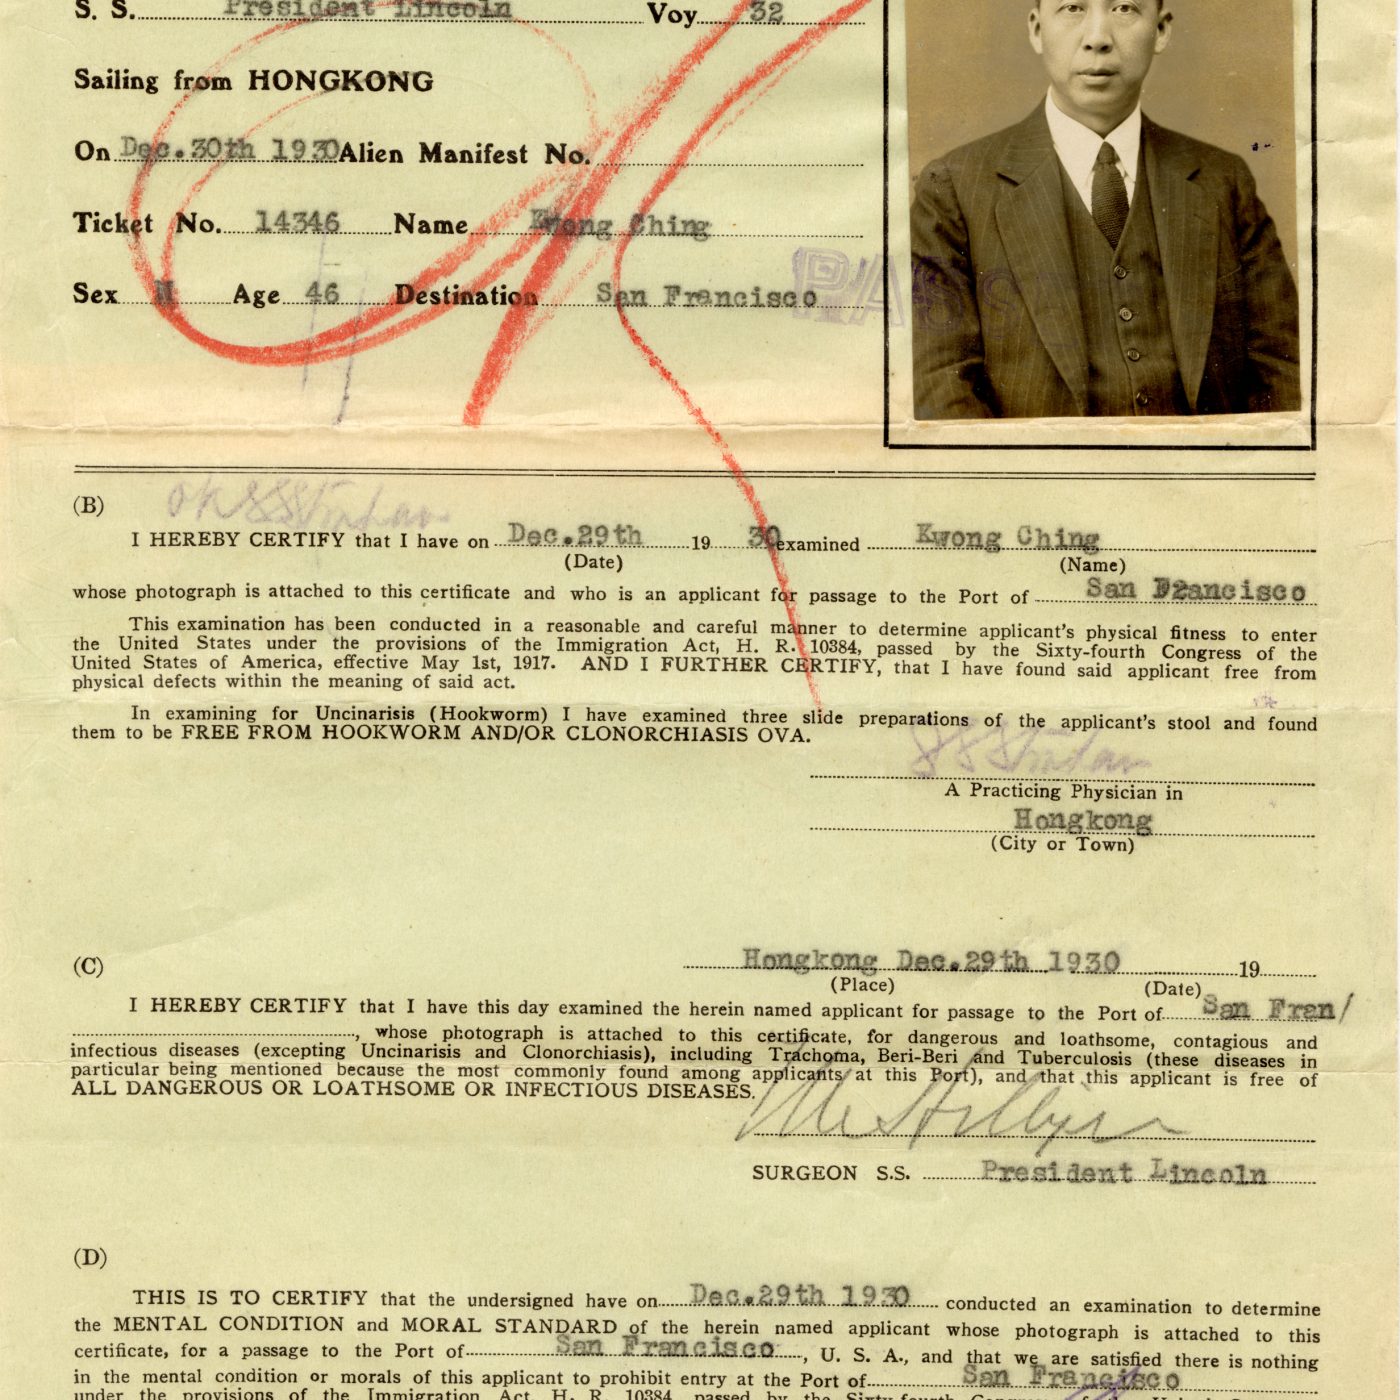 Dollar Steamship Line Certificate of Medical Examination, 1930. Courtesy of Roy Delbyck, Museum of Chinese in America (MOCA) Collection.